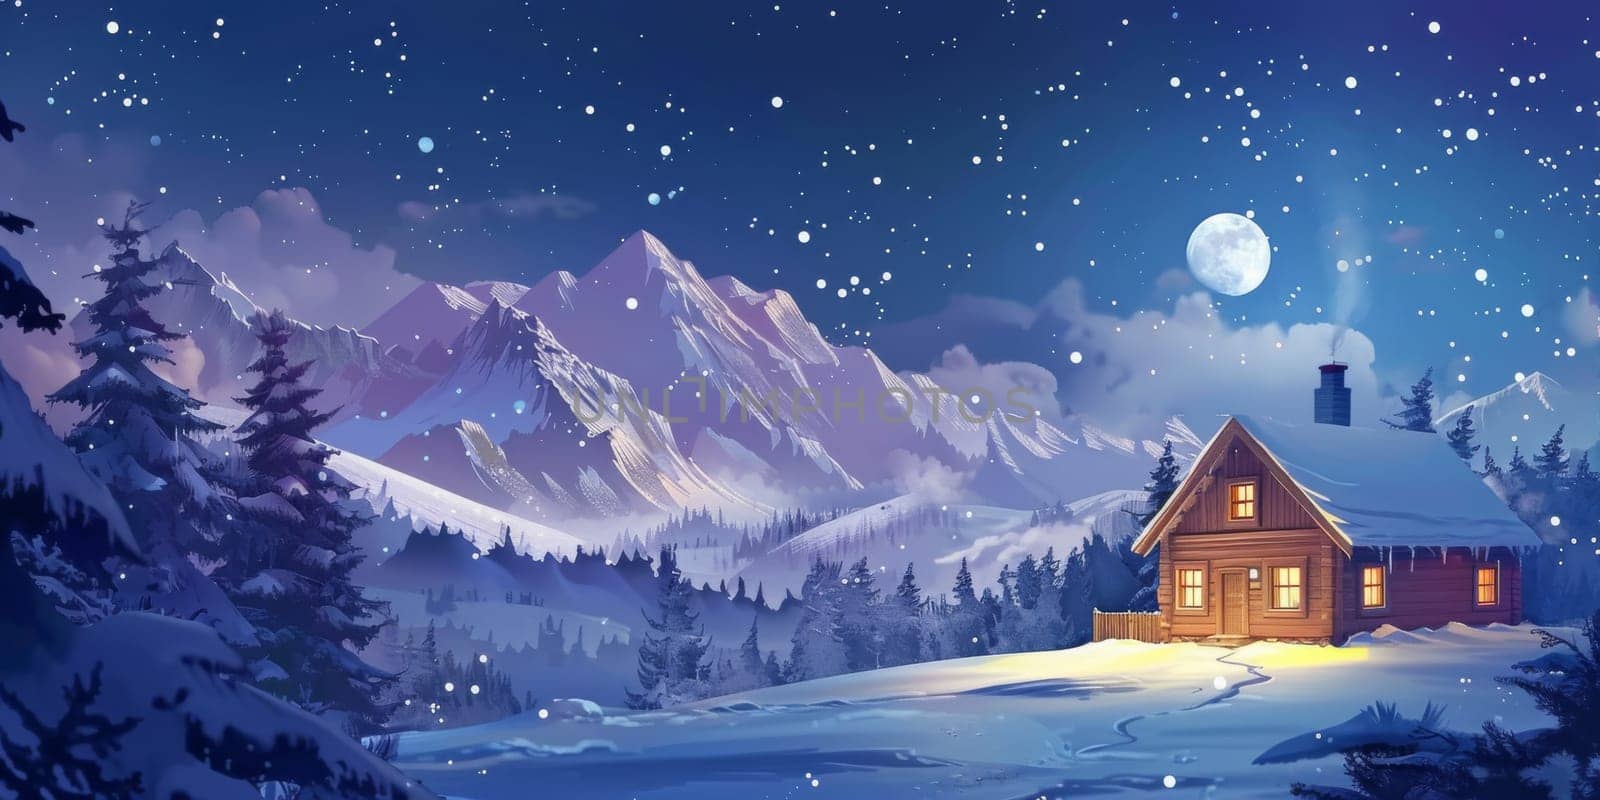 Fantastic cottage with a winter landscape in snowy mountains during night